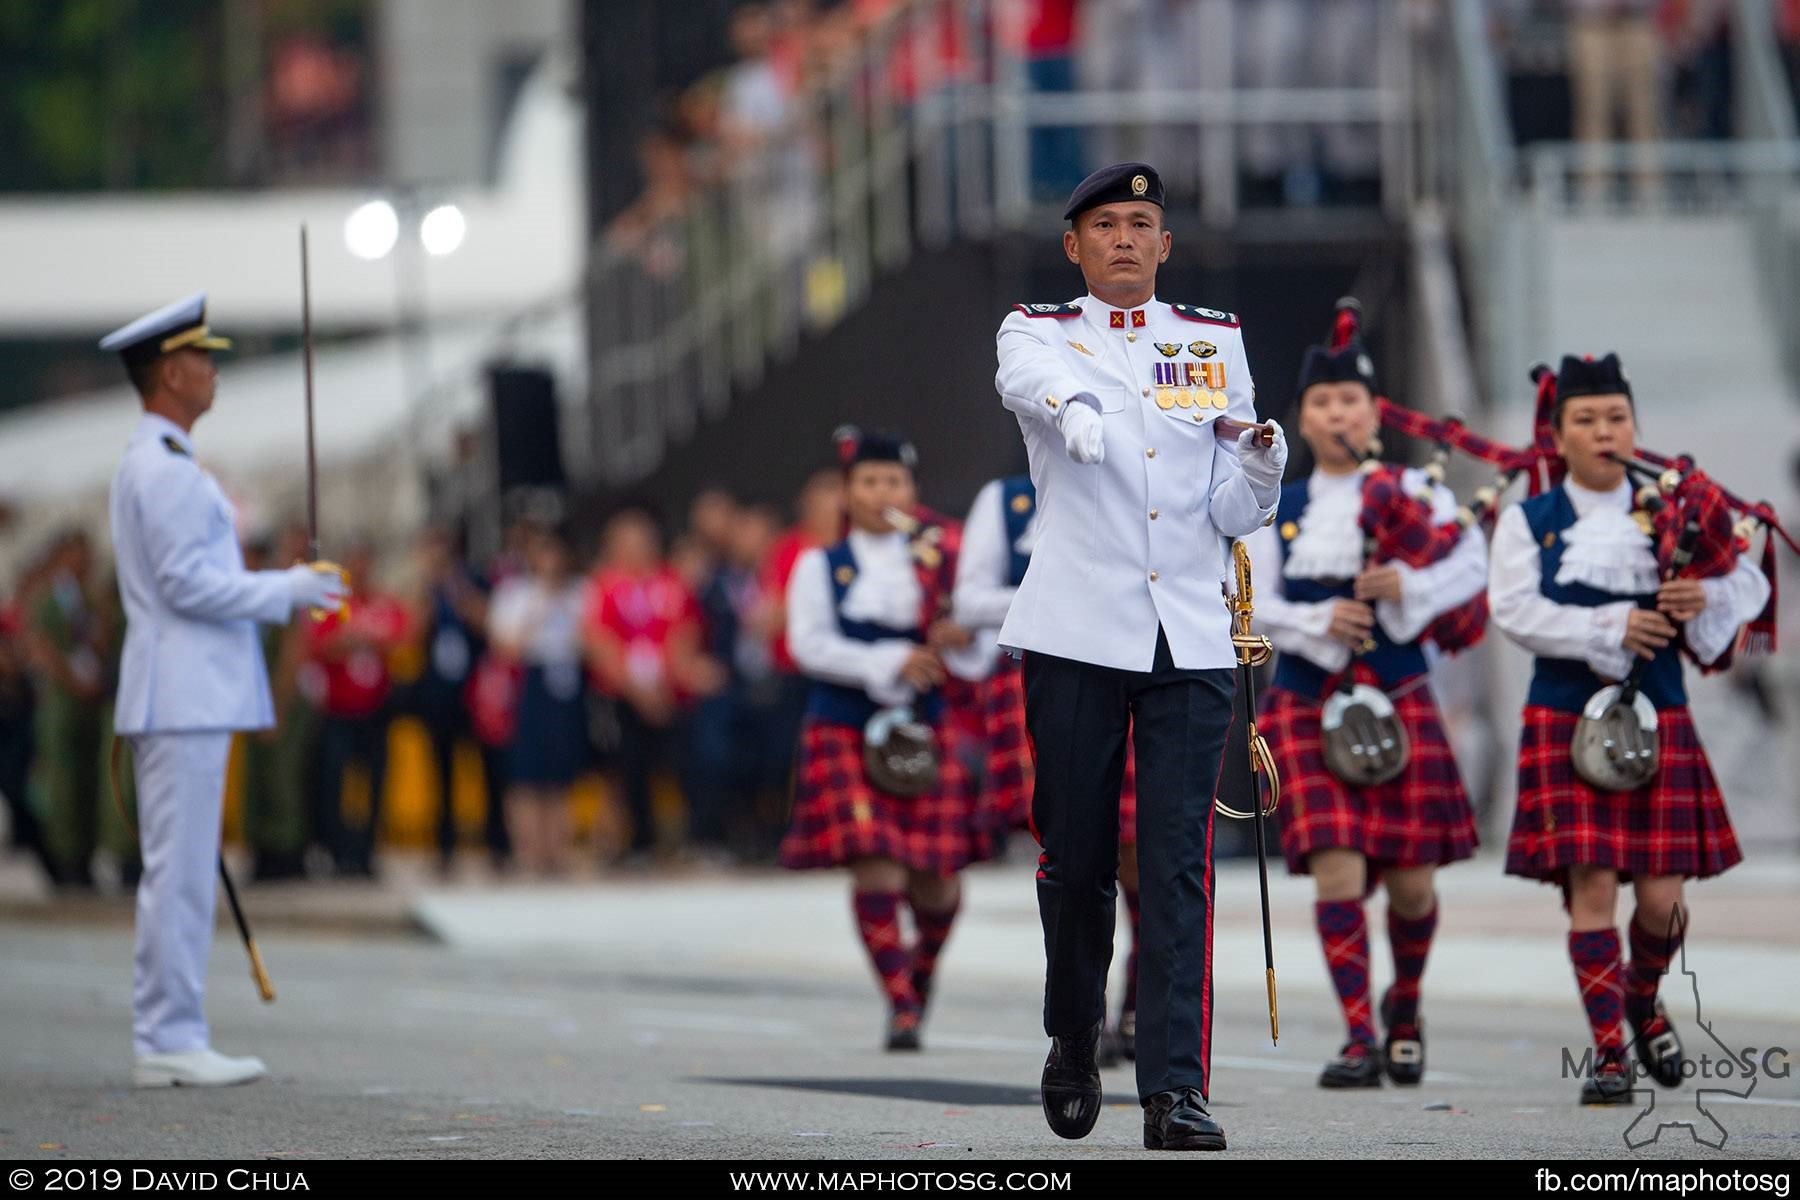 Parade Regimental Sergeant Major, MWO Chong Wee Keong from 3 Division Artillery